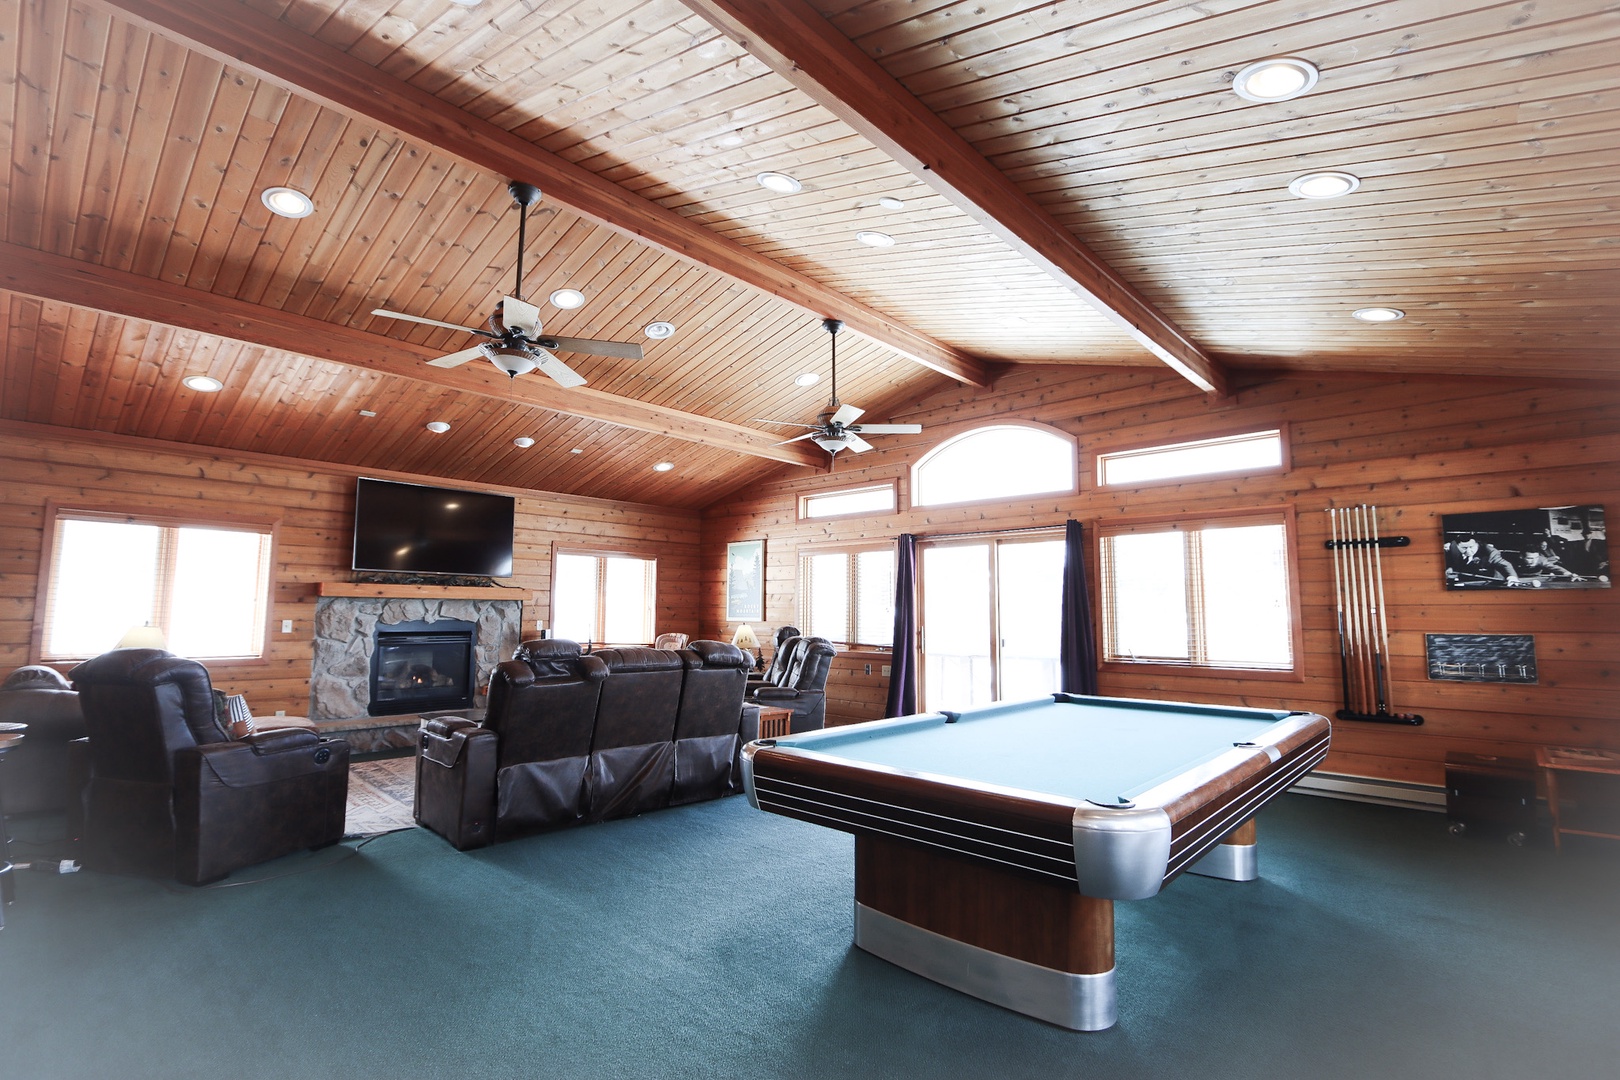 Living room 1 with reclining leather seating, fireplace, TV, and pool table